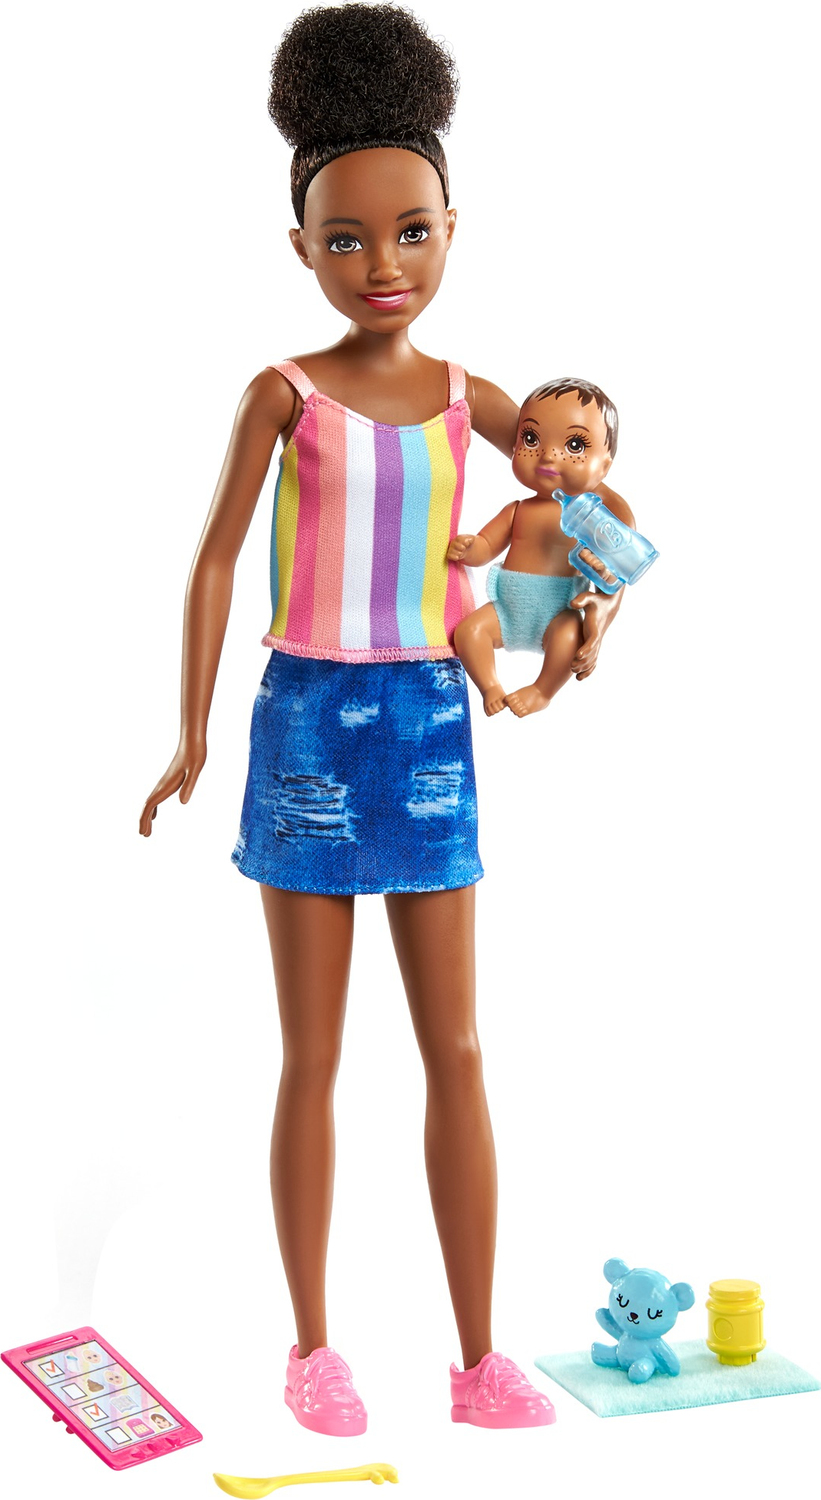 Barbie Club Chelsea Doll (assorted) - The Toy Box Hanover